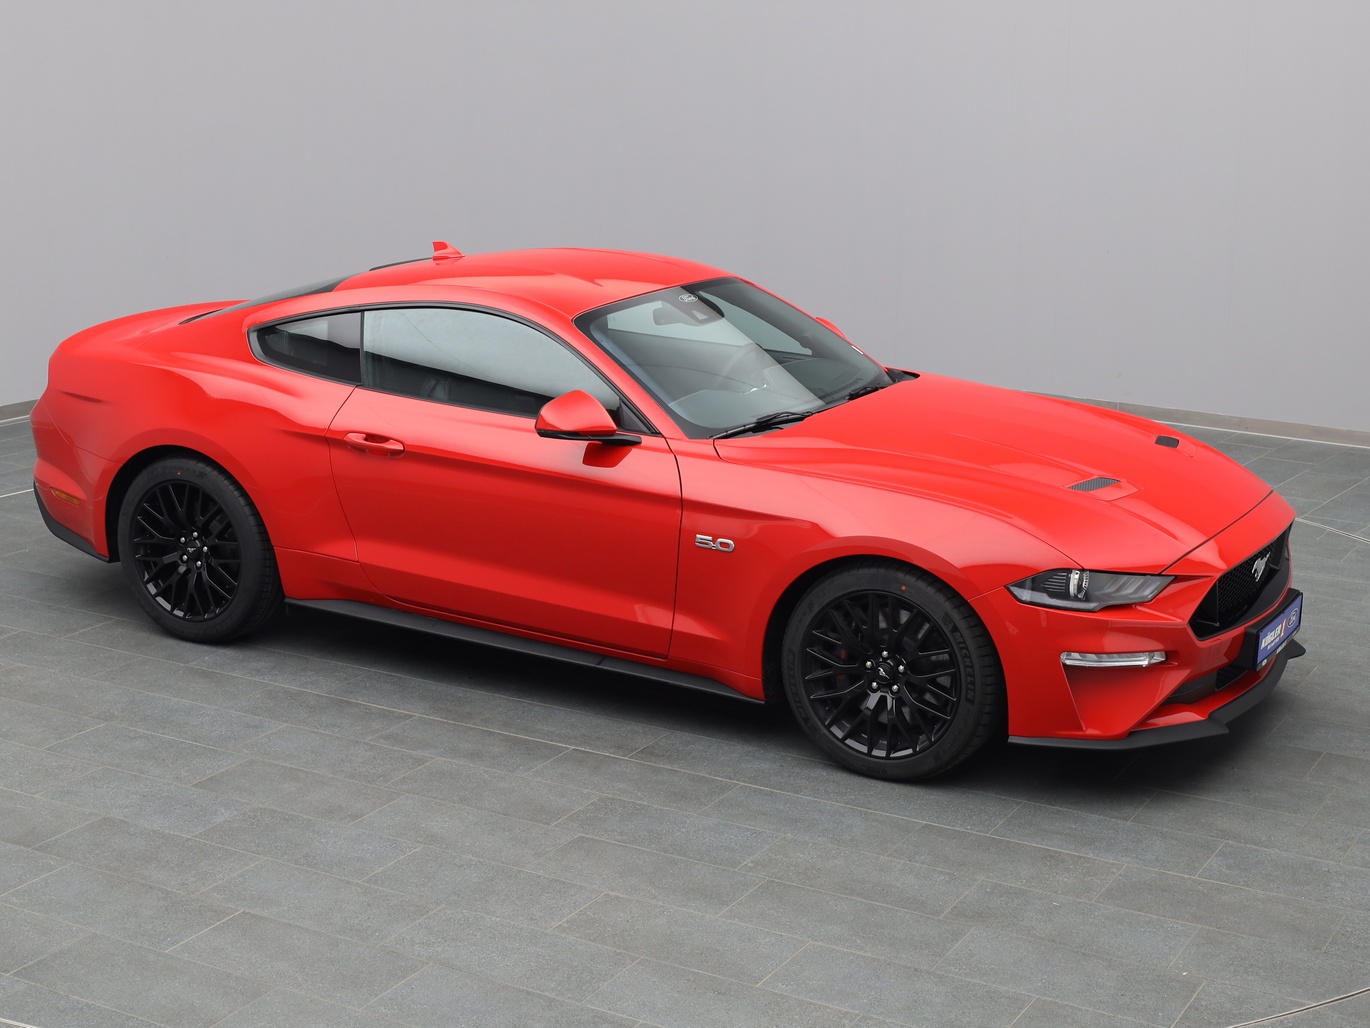  Ford Mustang GT Coupé V8 450PS / Premium 2 / Magne in Race-rot 